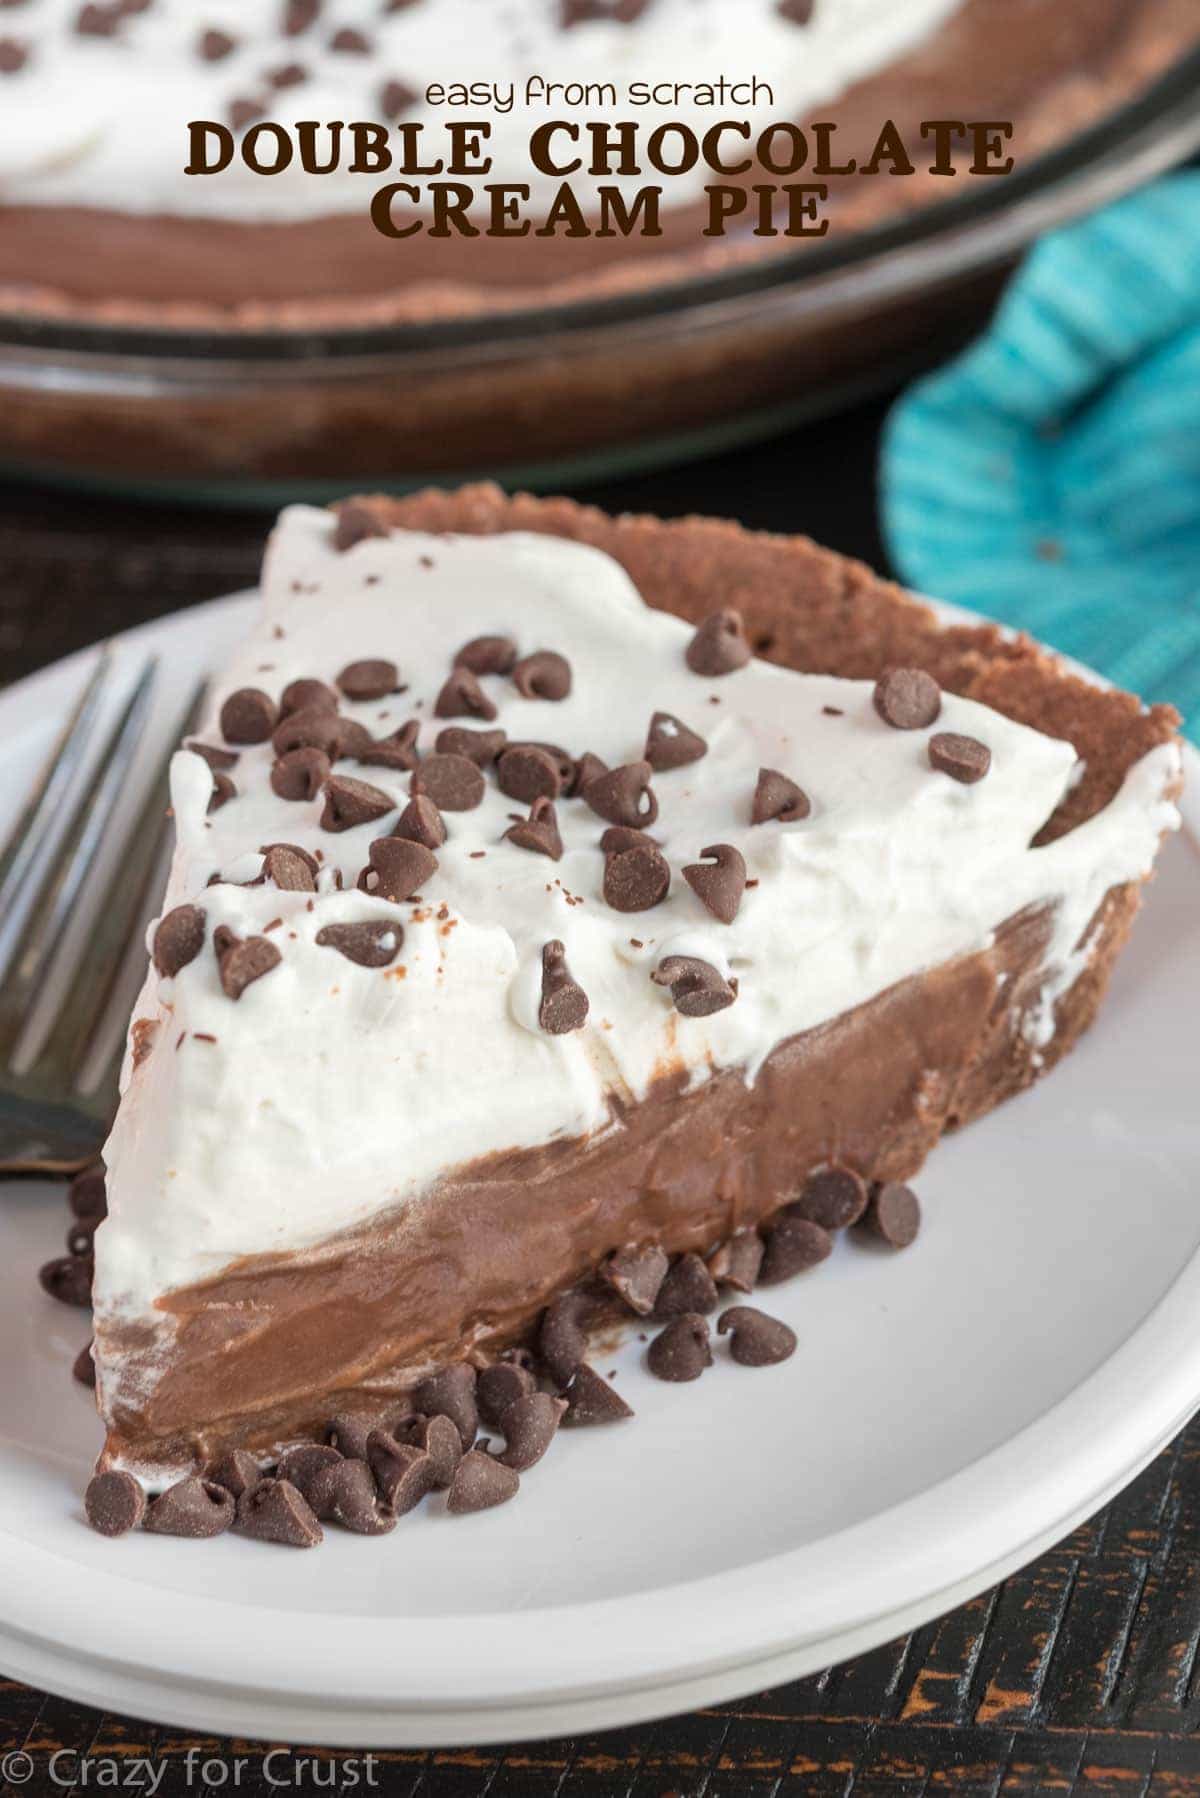 Double Chocolate Cream Pie - this easy pie recipe is completely from scratch! This chocolate cream pie with a chocolate crust is great for any occasion.